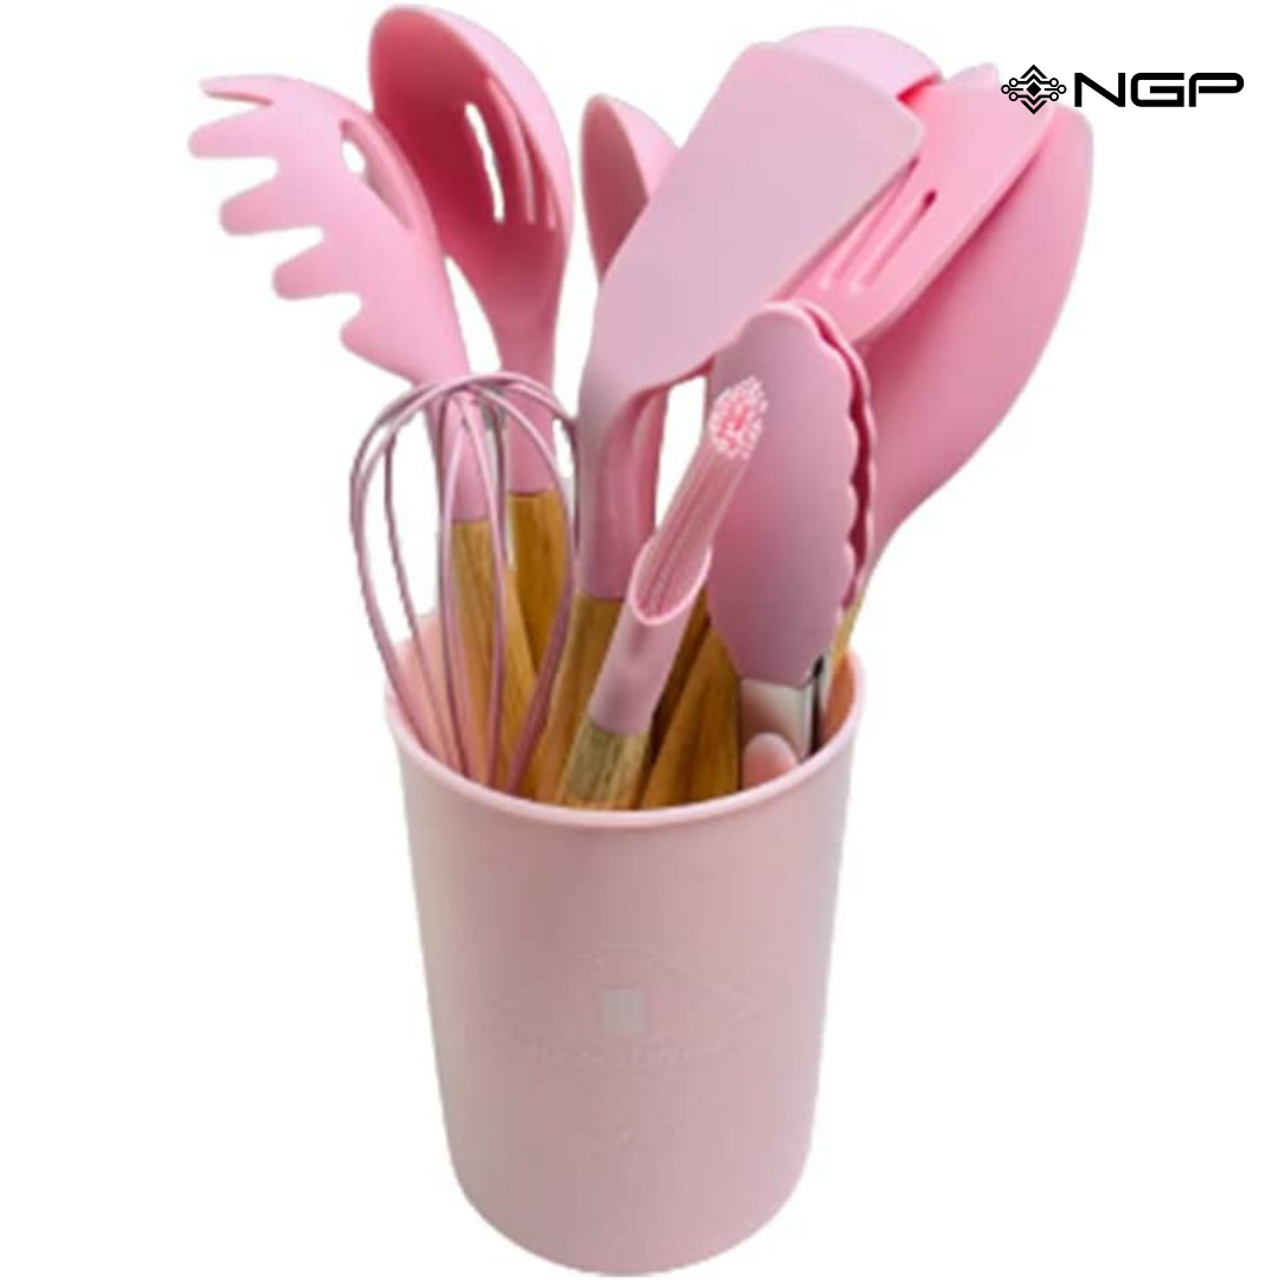 Wooden Cooking Utensils Set with Pink Rose Gold Handles – INSETLAN